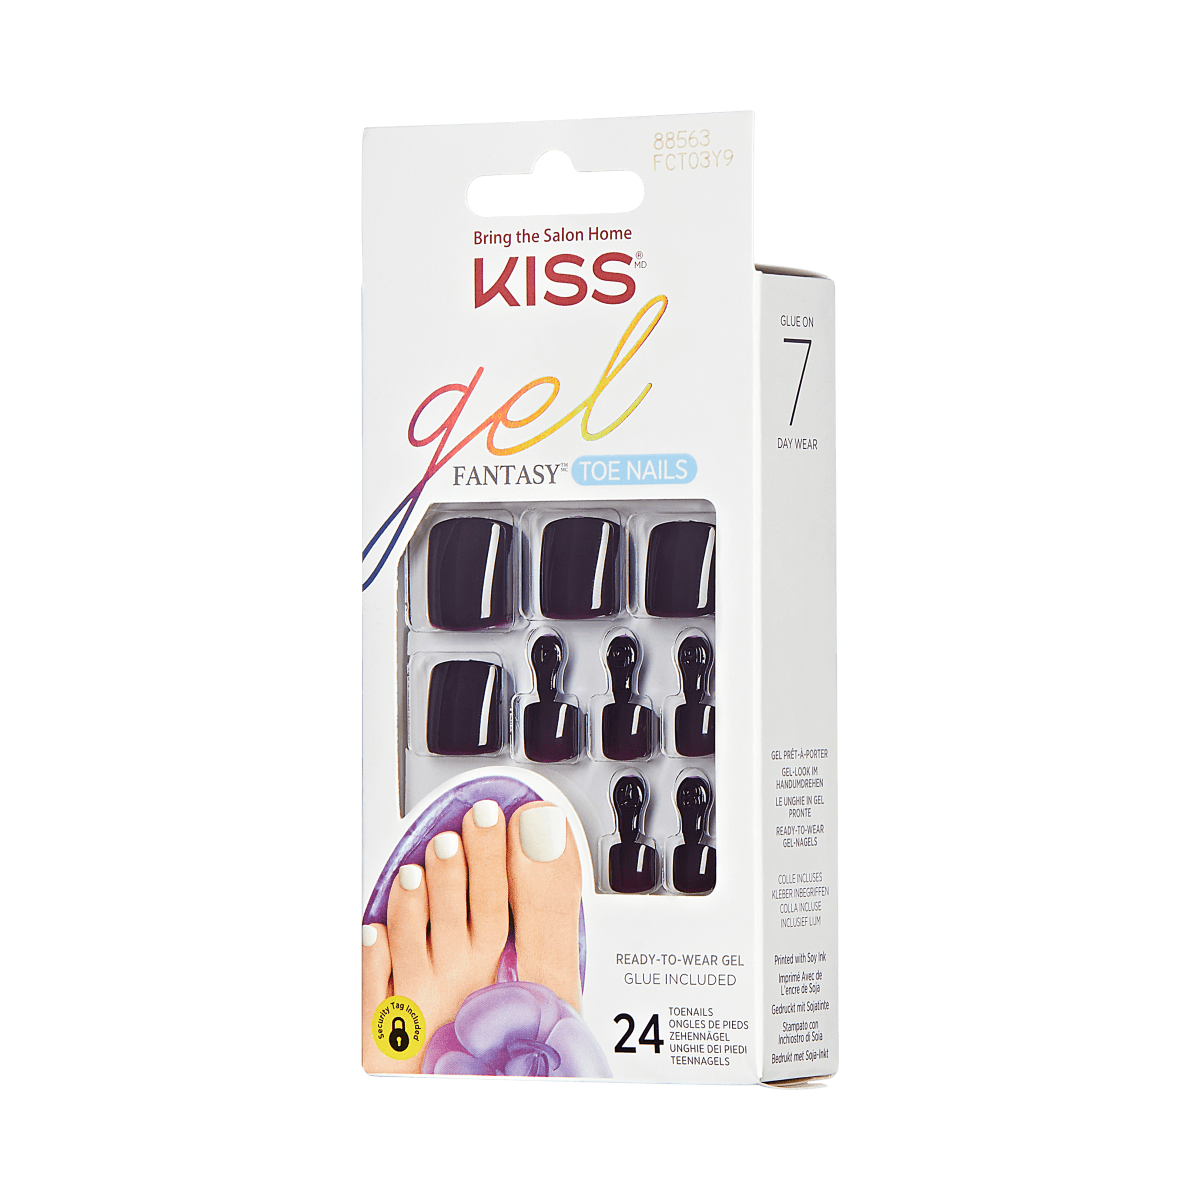 KISS Gel Fantasy, Press-On Nails, Dark Chocolate, Red, Pedicure Squoval, 24ct